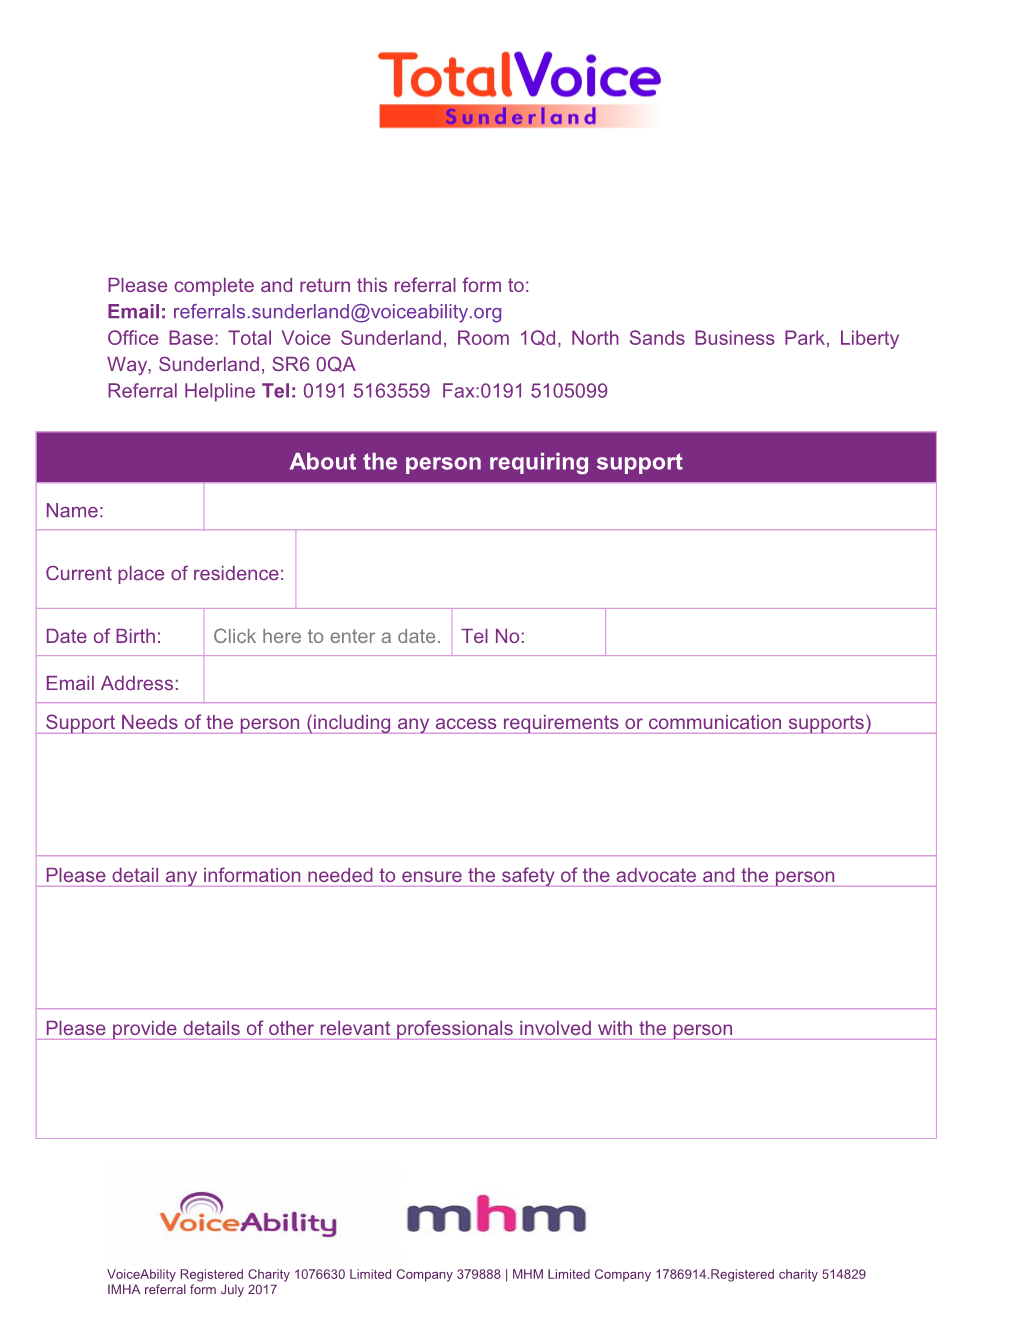 Please Complete and Return This Referral Form To